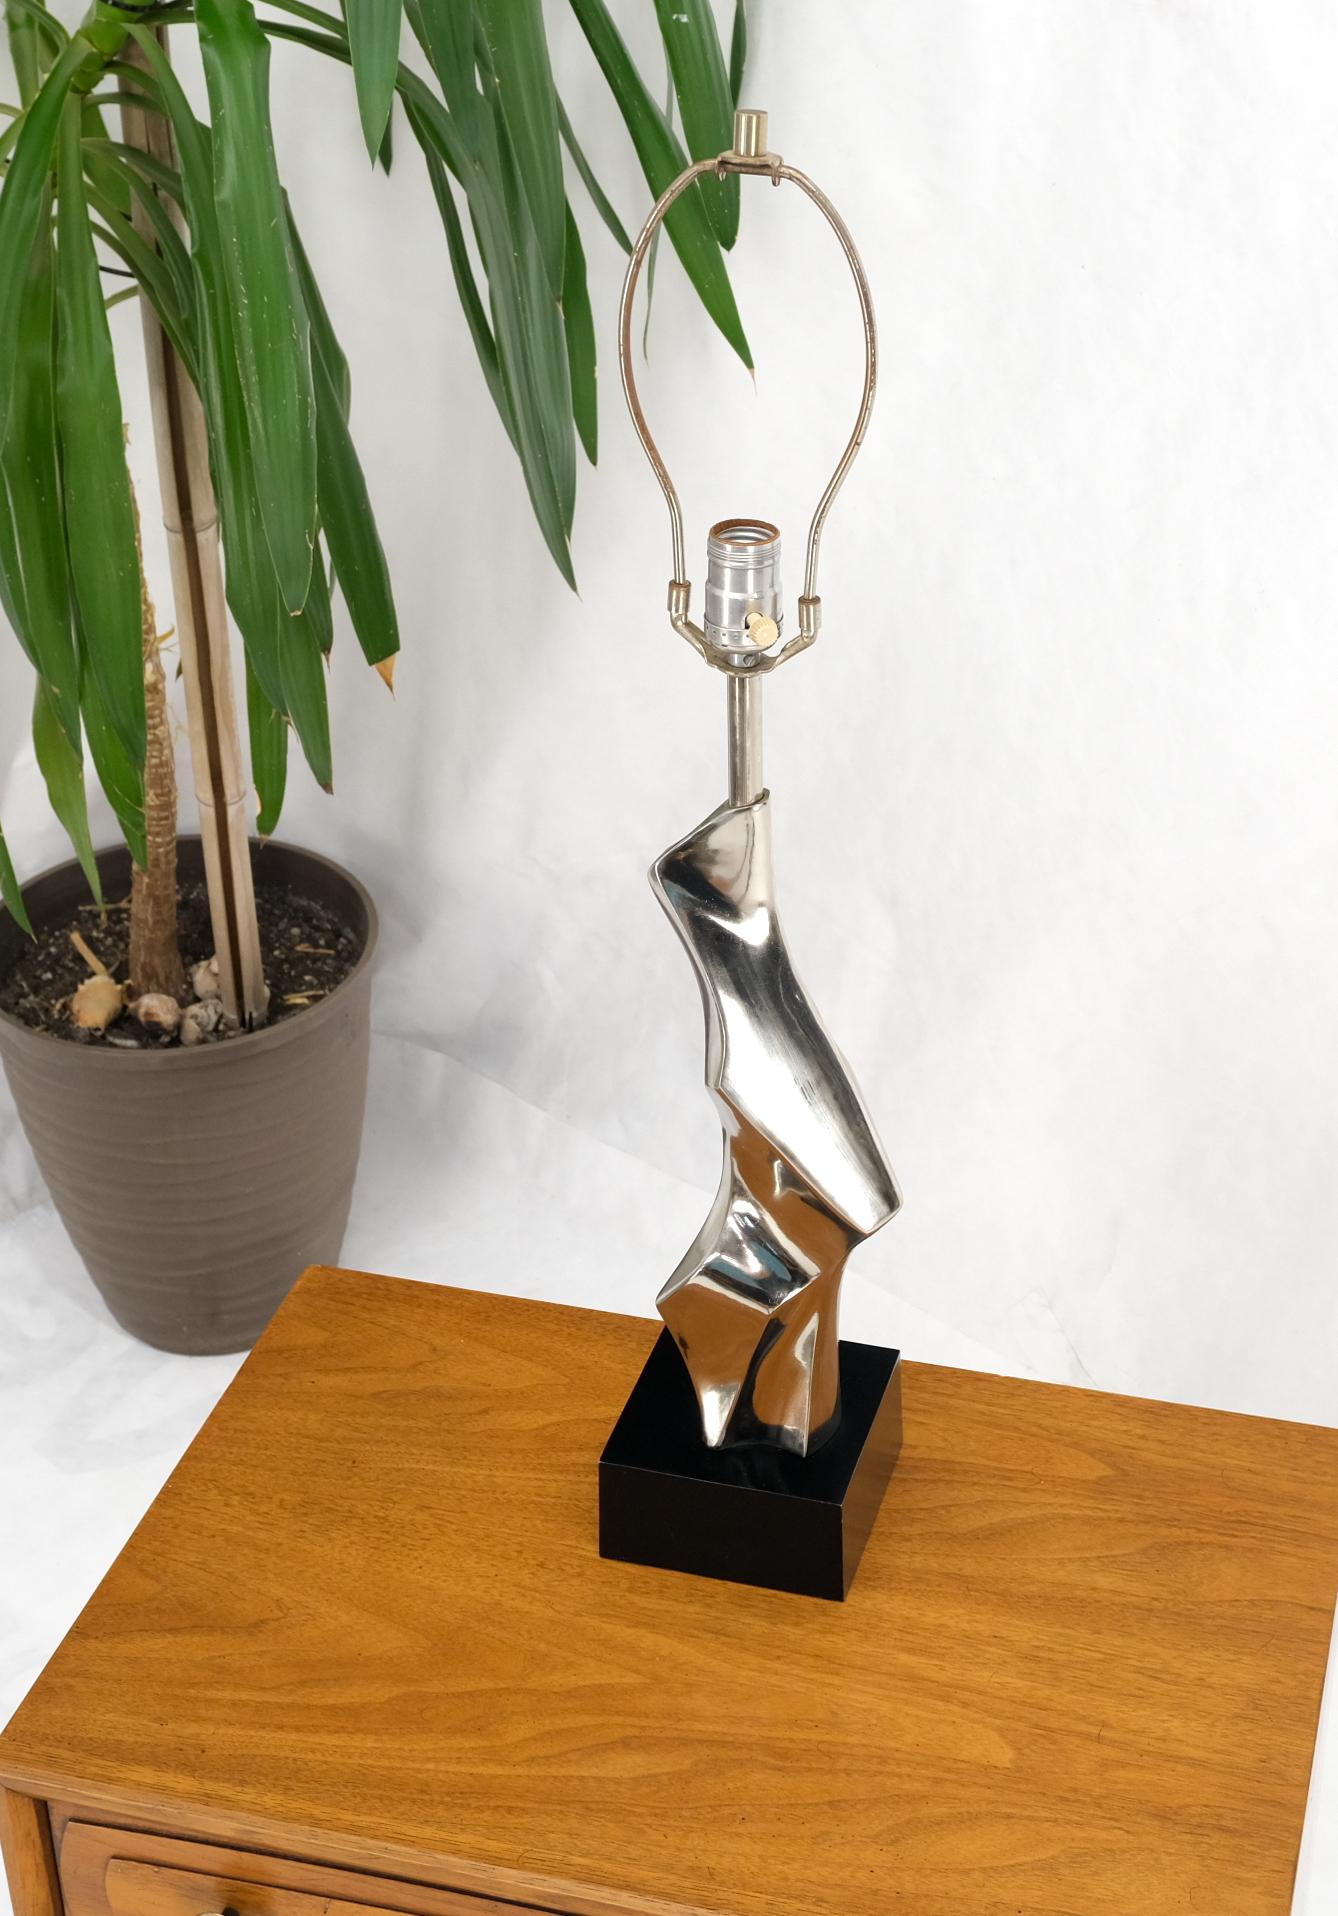 Abstract Polished Metal Chrome Table Lamp in Style of Picasso For Sale 5